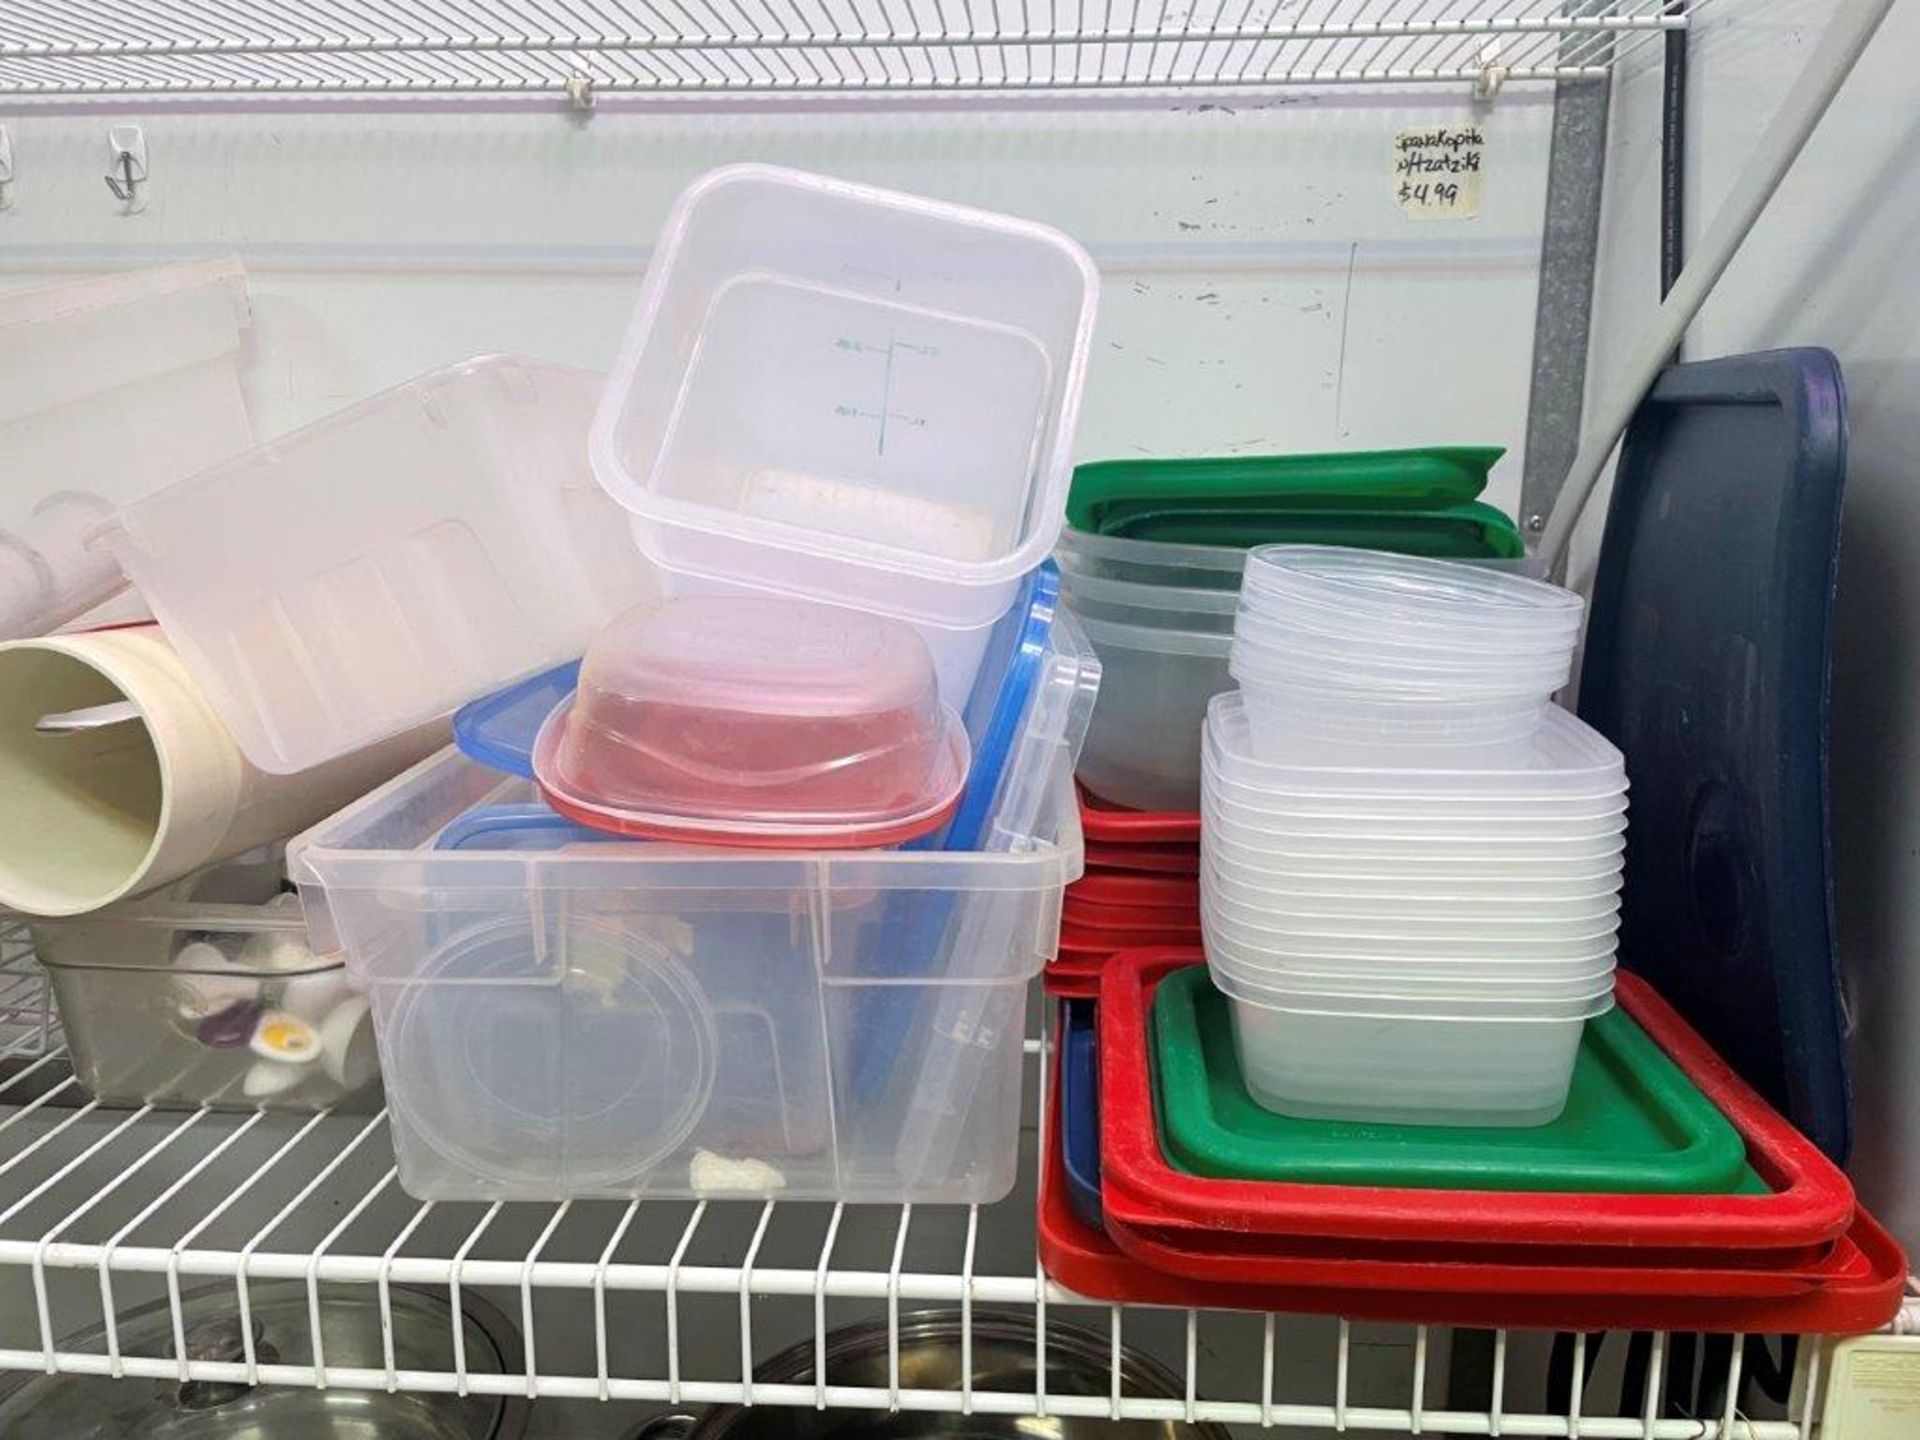 L/O ASSORTED PLASTIC CONTAINERS, BOWLS, MEASURING CUPS, ETC. - Image 4 of 4